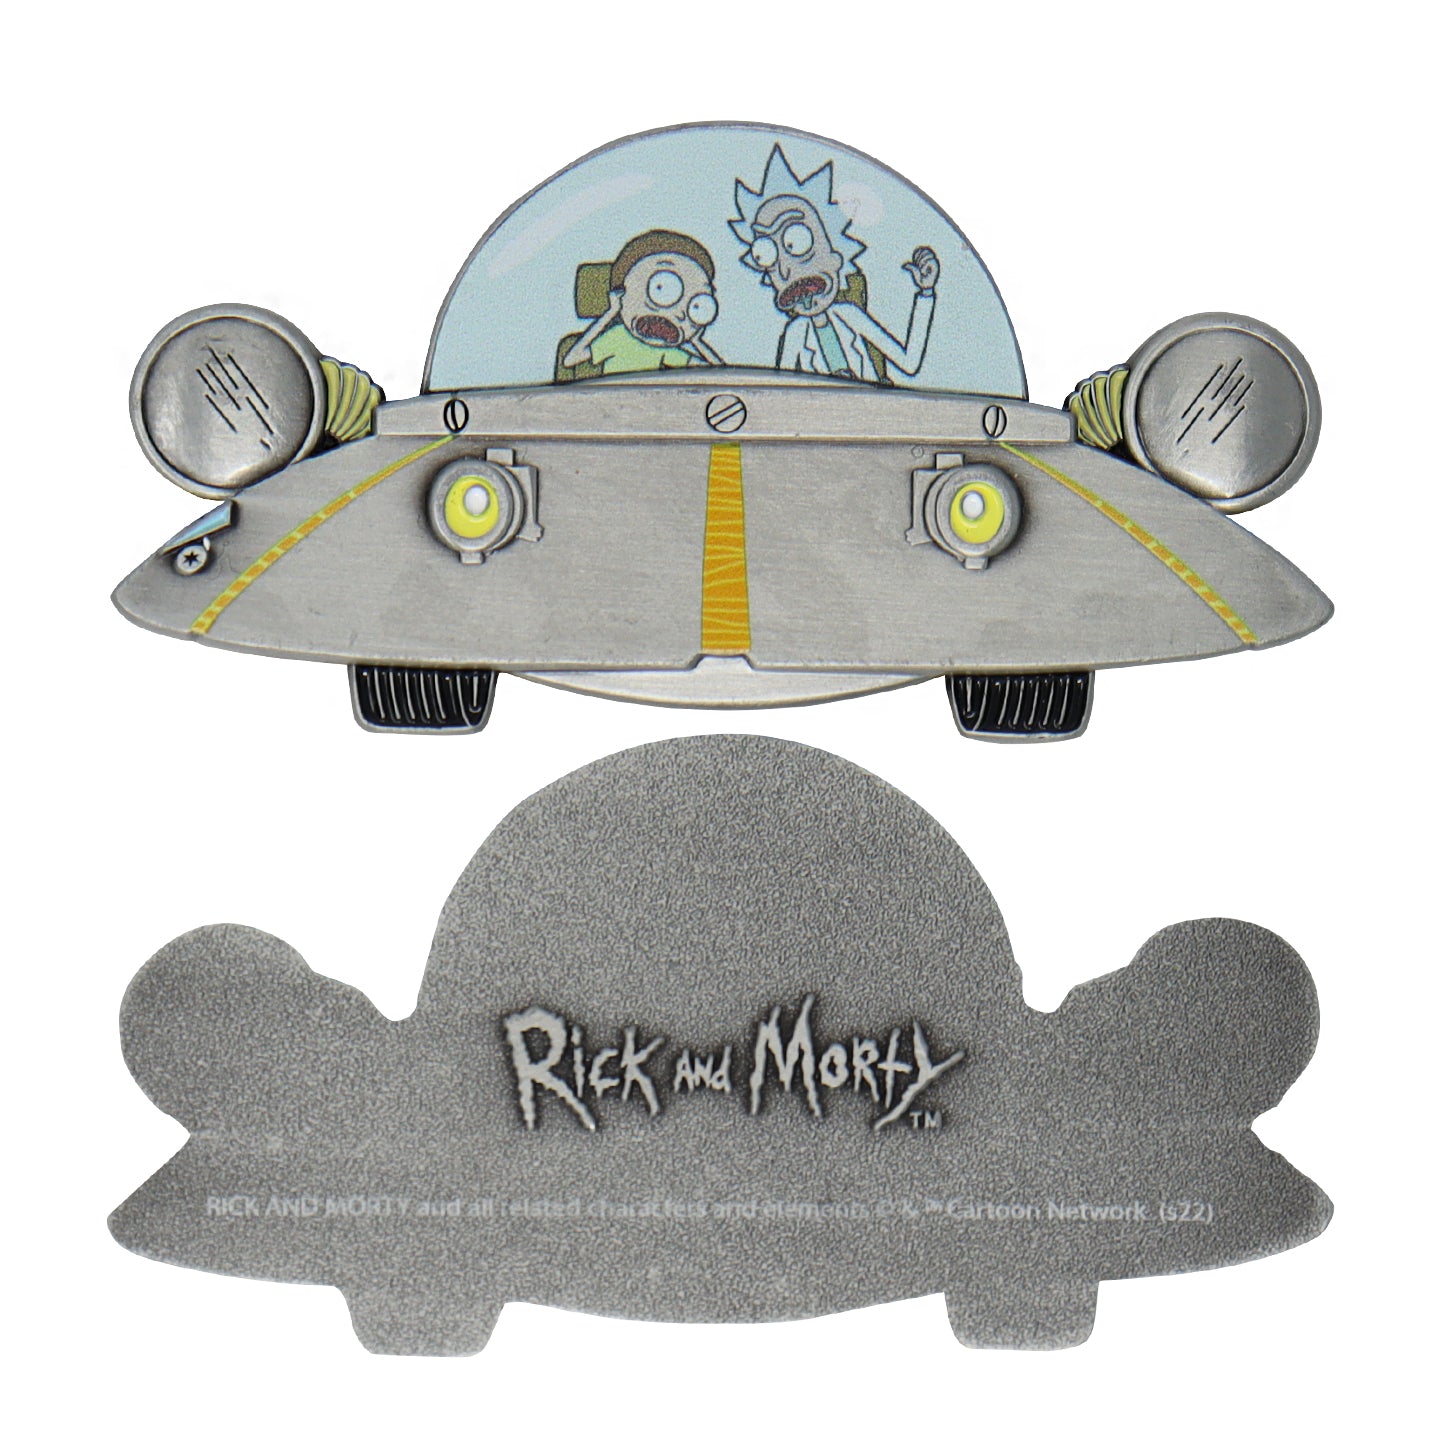 Rick & Morty Limited Edition Medallion